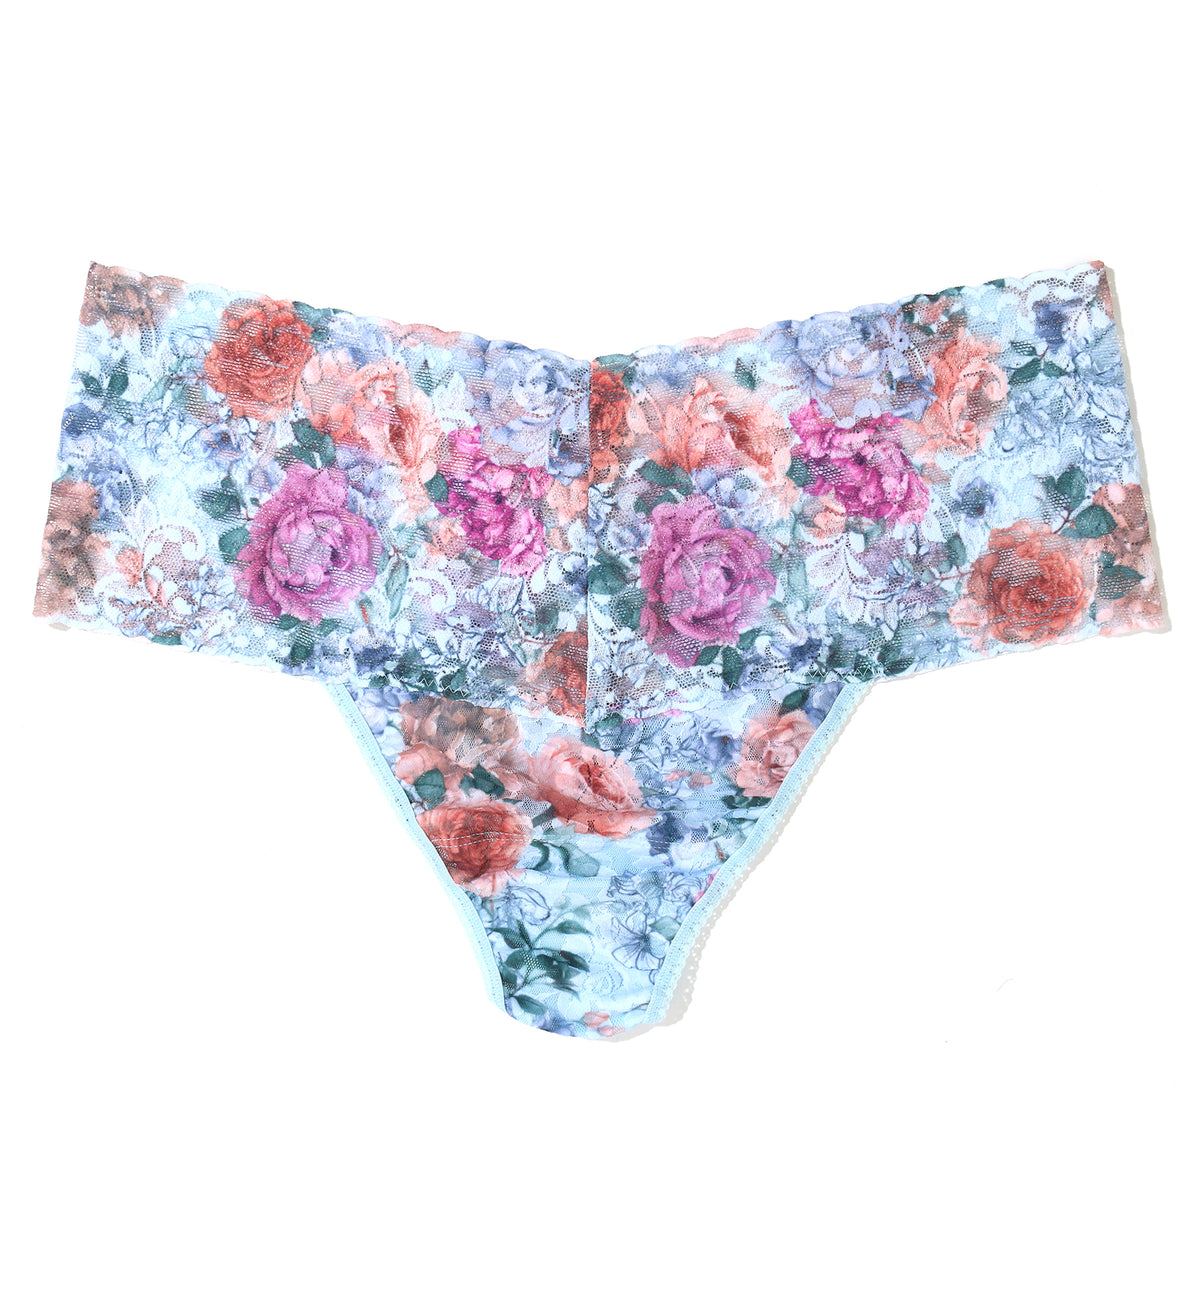 Hanky Panky Signature Lace Printed PLUS Retro Thong (PR9K1926X),Tea for Two - Tea for Two,One Size